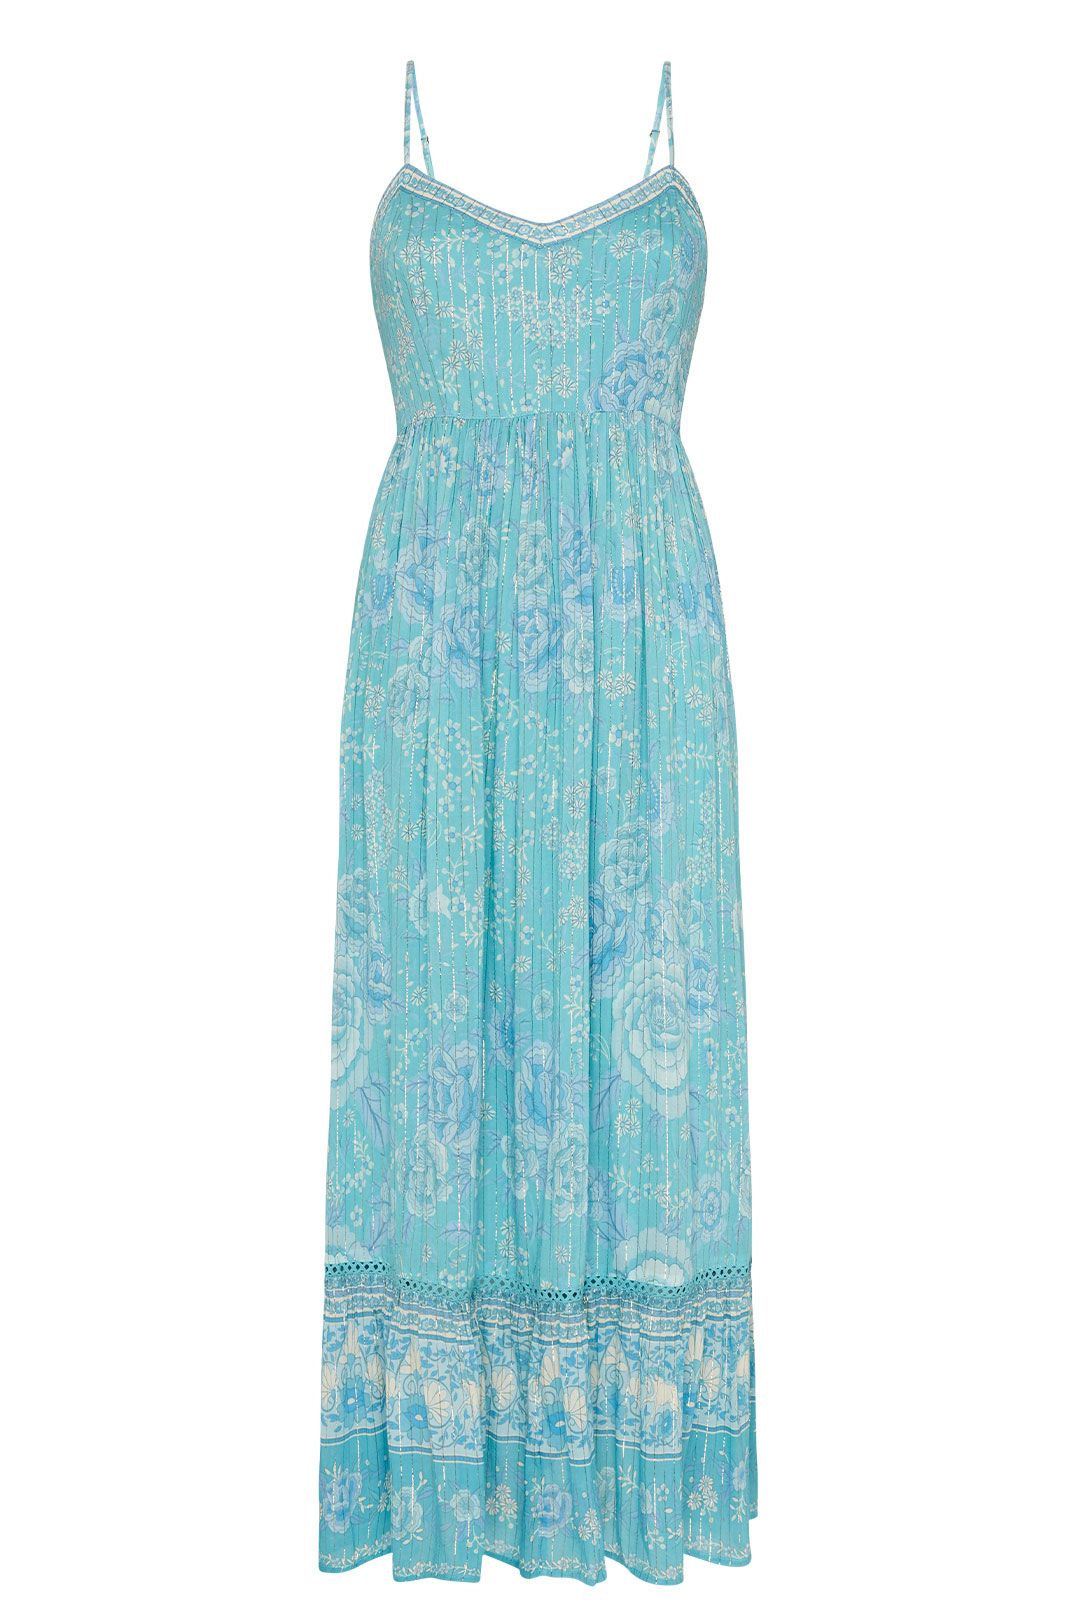 Spell Mystic Strappy Maxi Dress Turquoise V neck